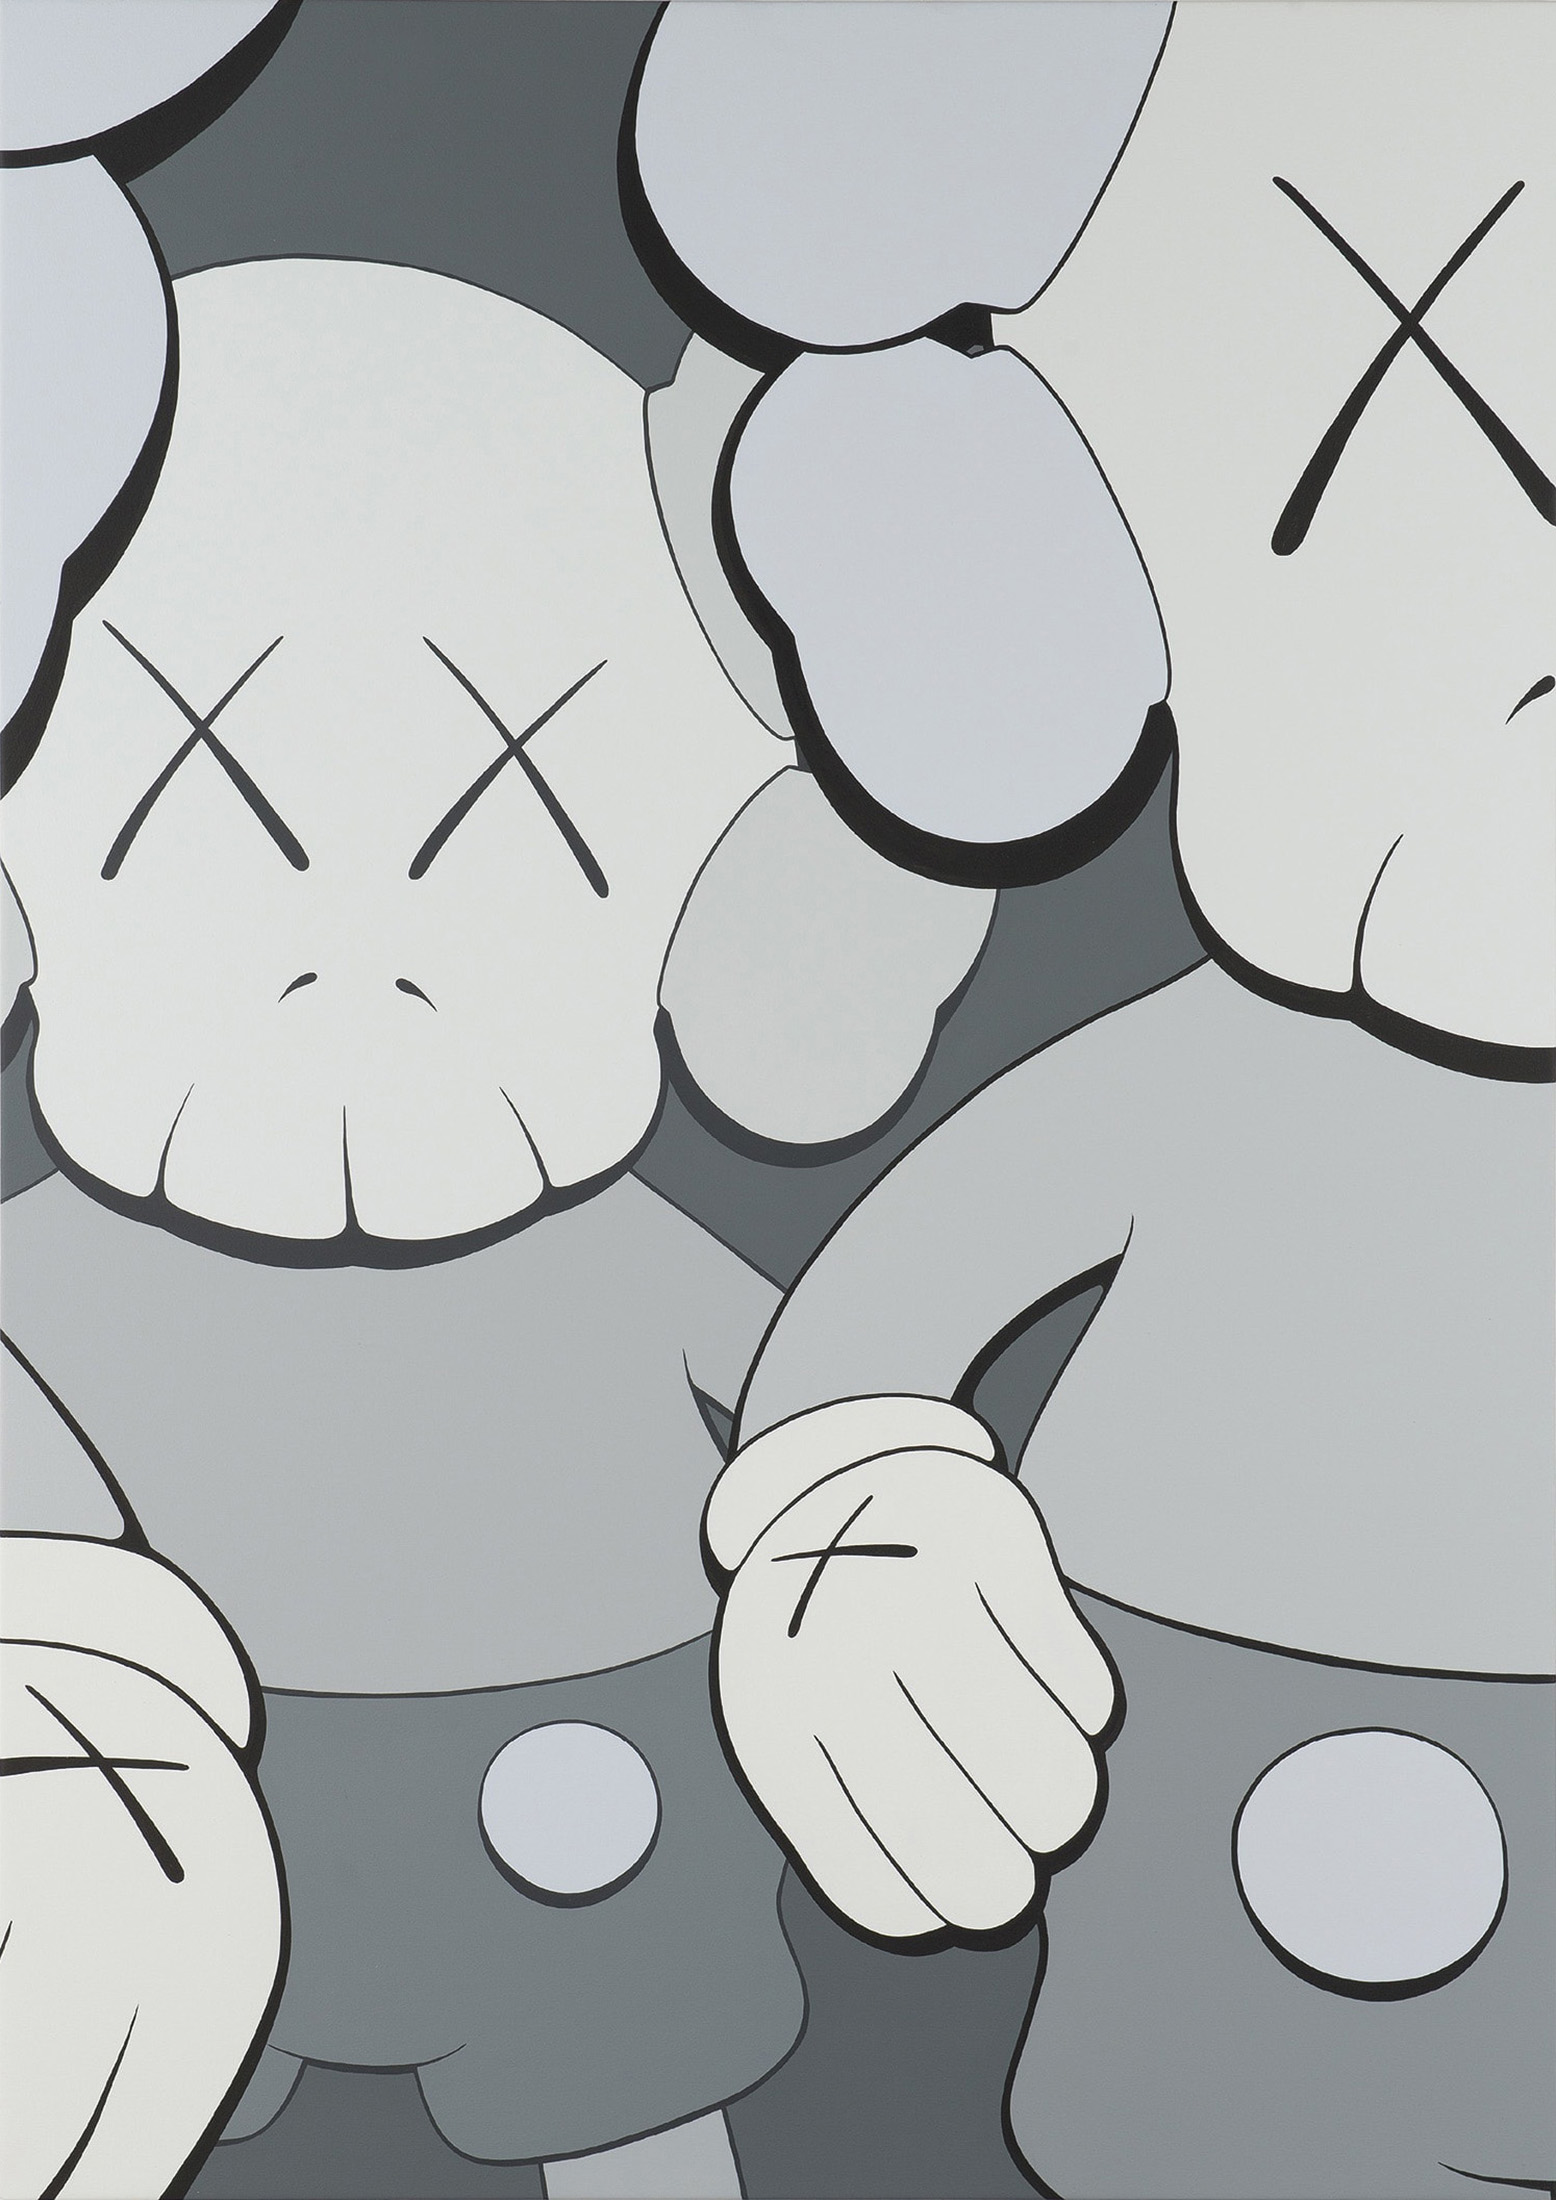 “Companion (Detail of Crowd Shot)” by graffiti artist KAWS. Startup Masterworks offered shares in the piece for $20 each in August.